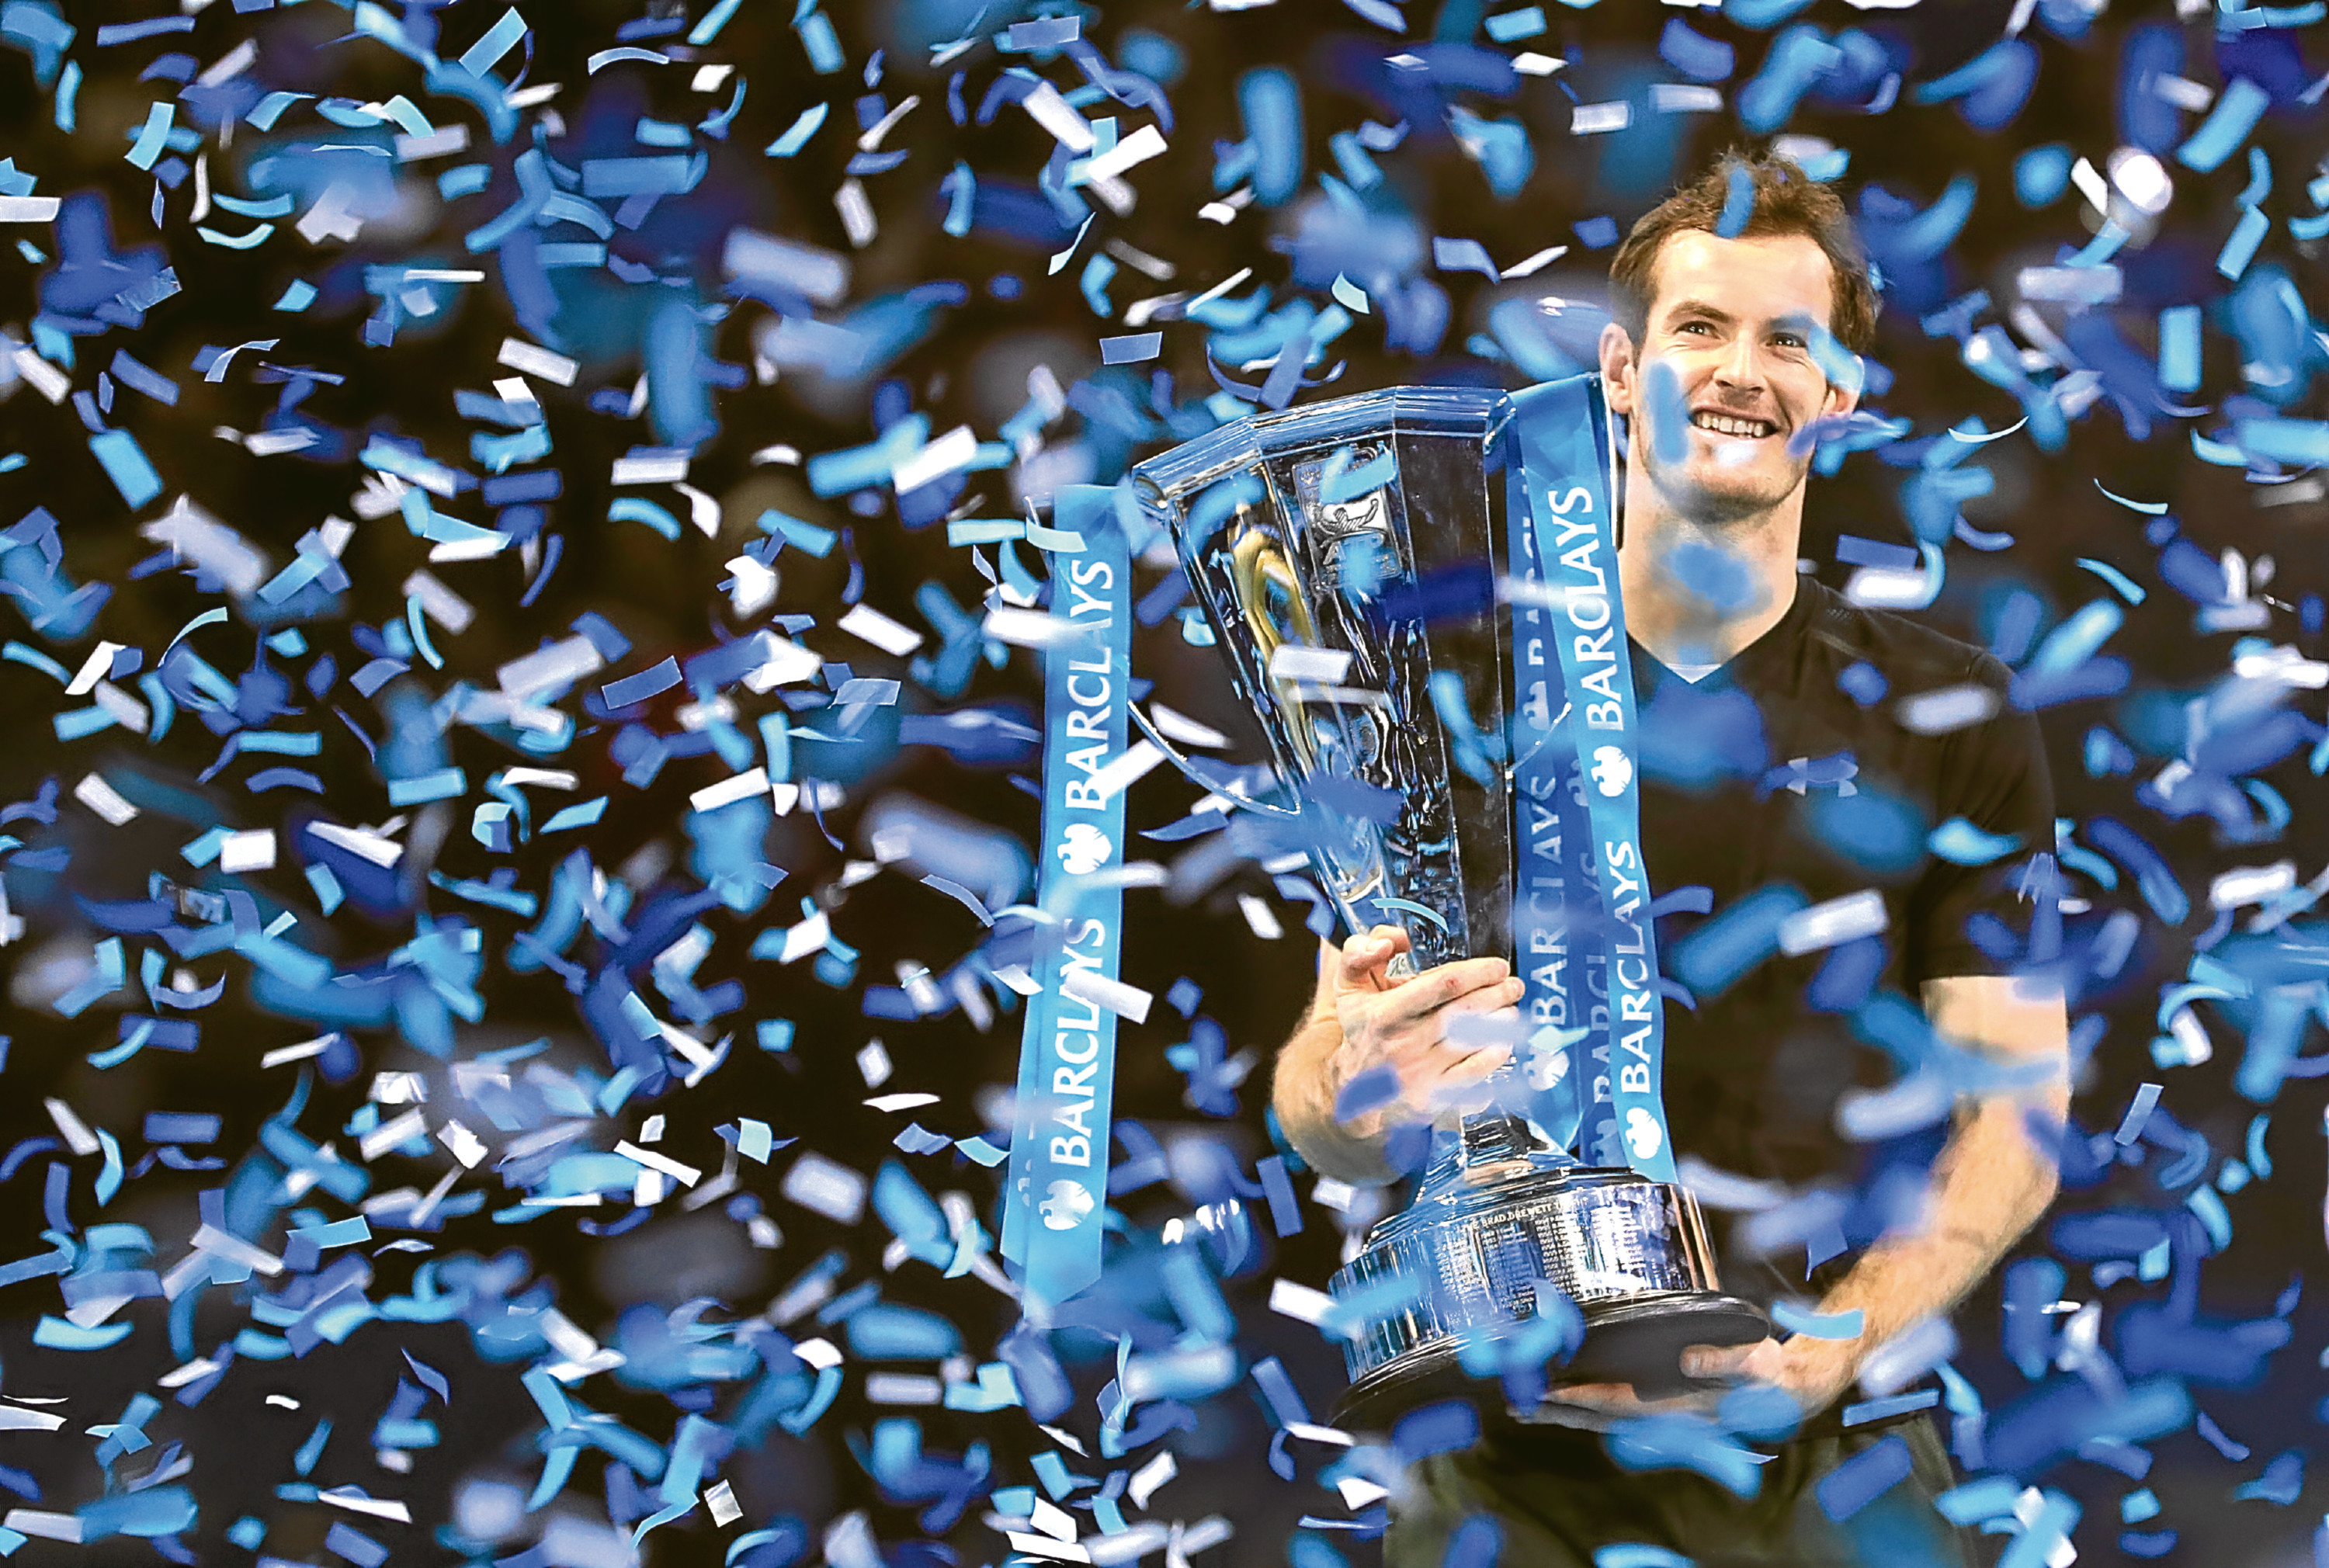 Andy Murray (Getty Images)